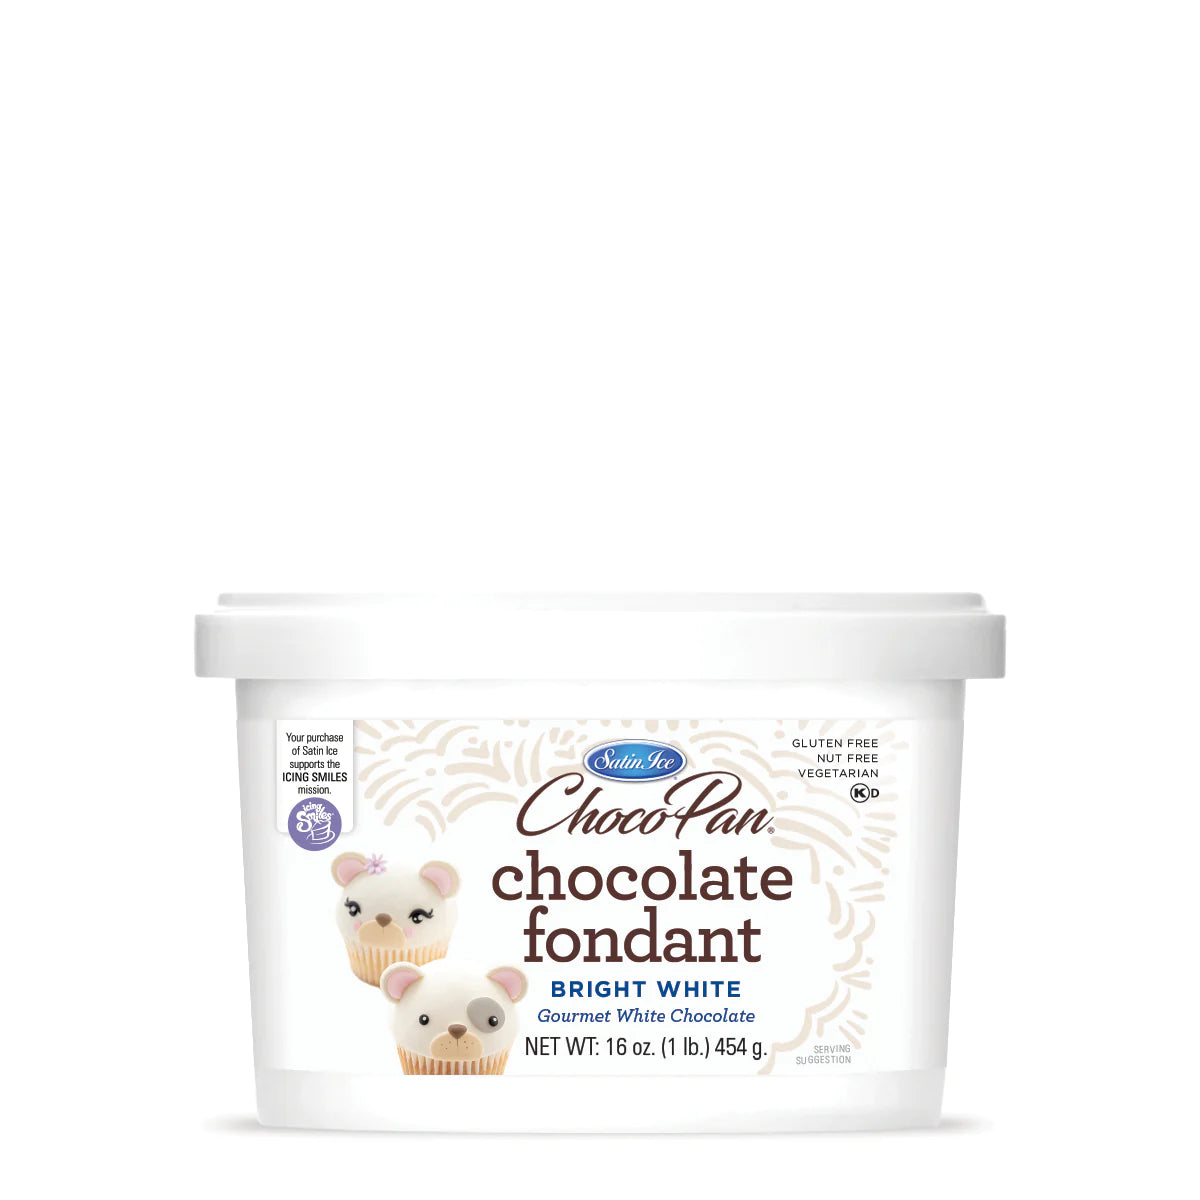 Bright White Colored and White Chocolate Flavored Fondant in a 1 Pound Container